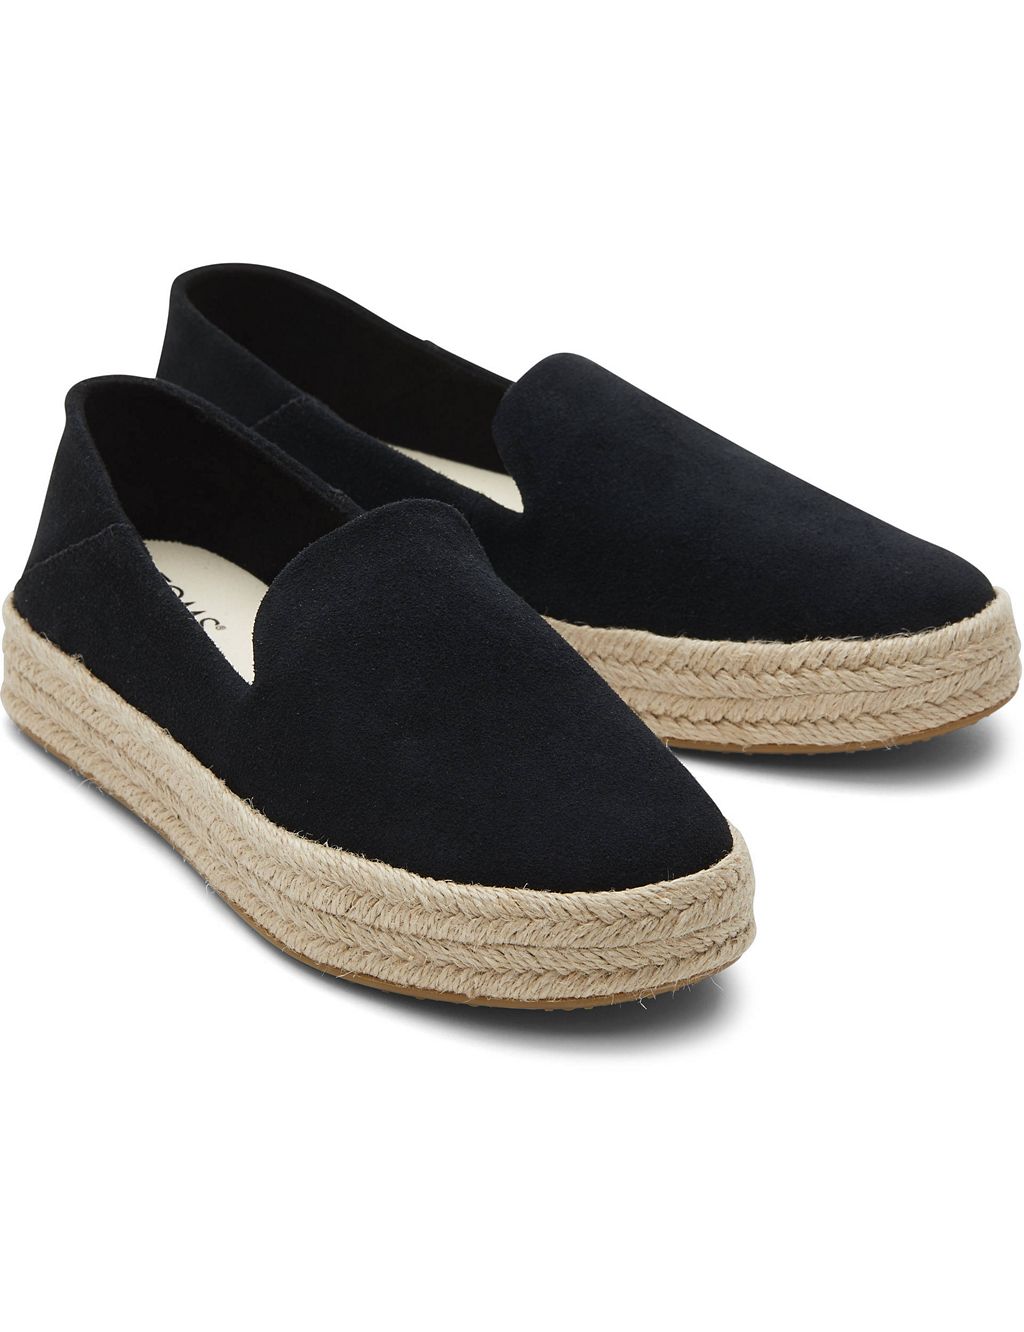 Leather Flat Espadrilles 1 of 7